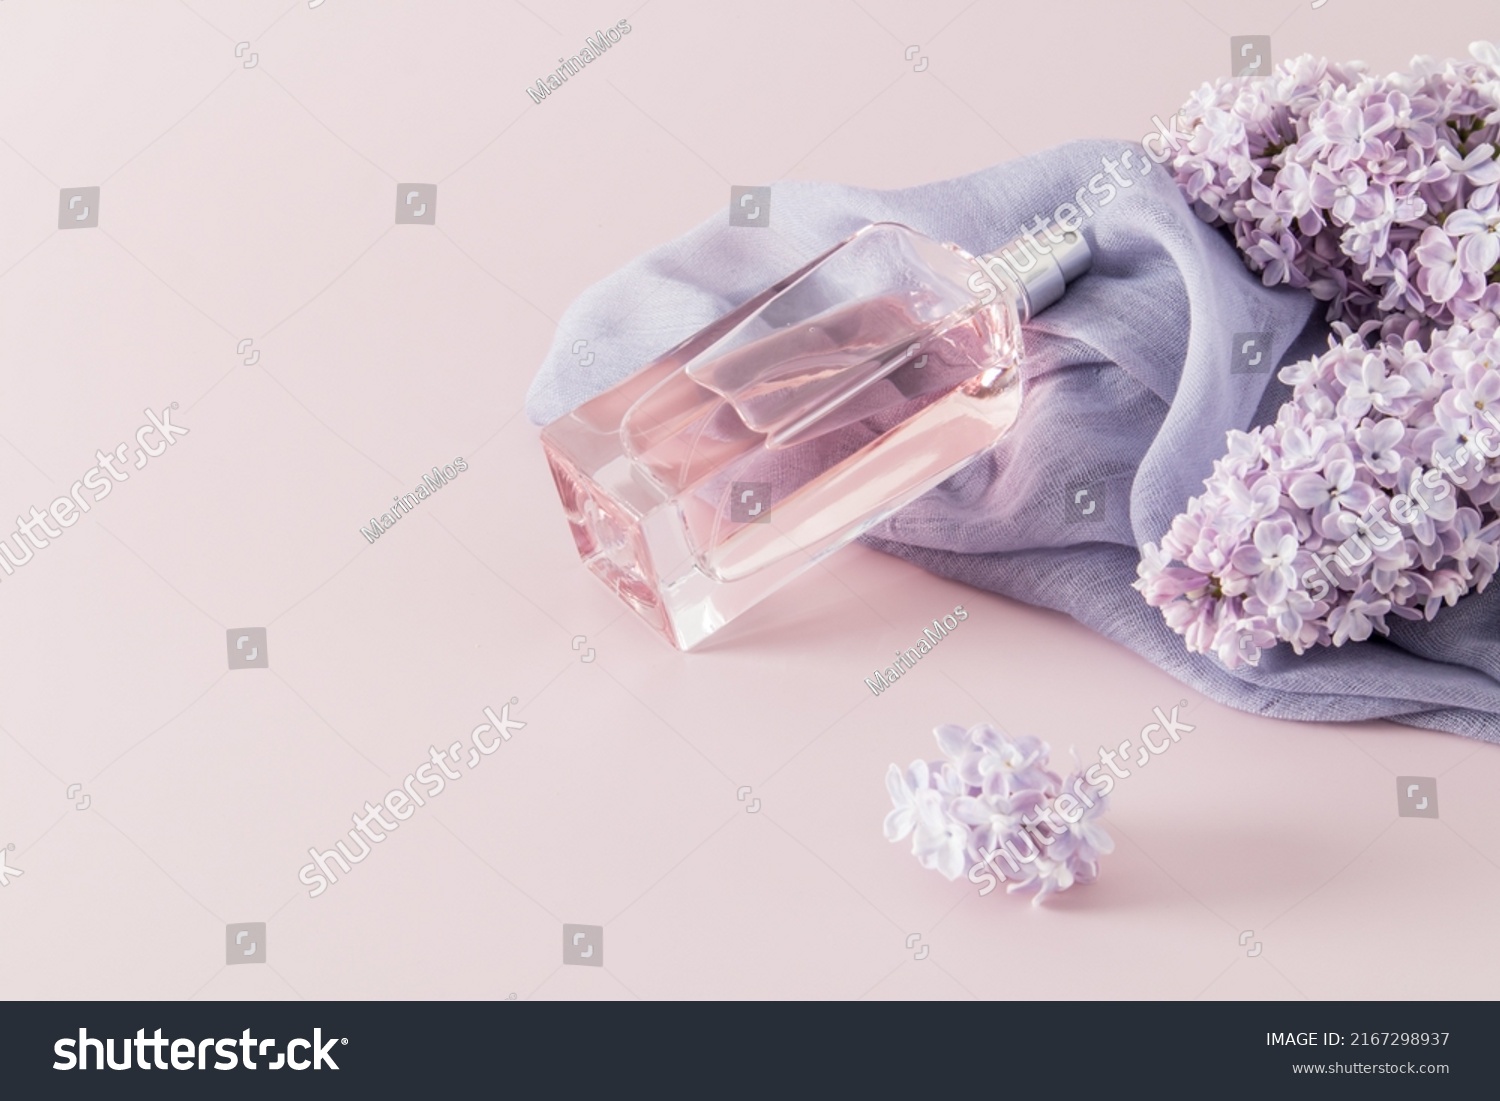 a chic bottle of women's perfume or eau de parfum lies on a woman's accessory - a scarf and lilac flowers. space for text. pink background #2167298937